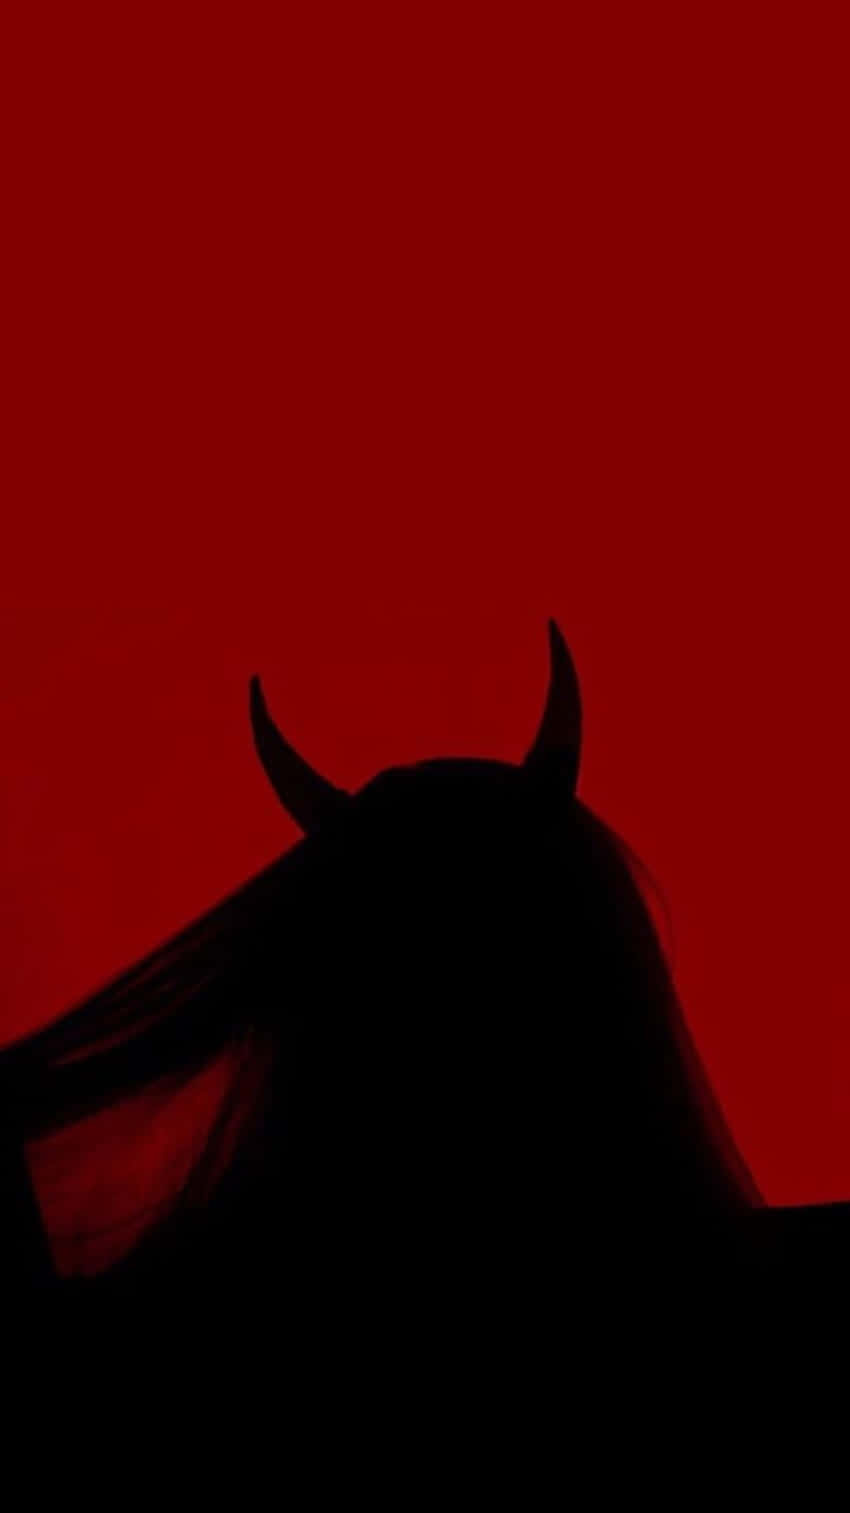 A Silhouette Of A Woman With Horns In Front Of A Red Background Wallpaper